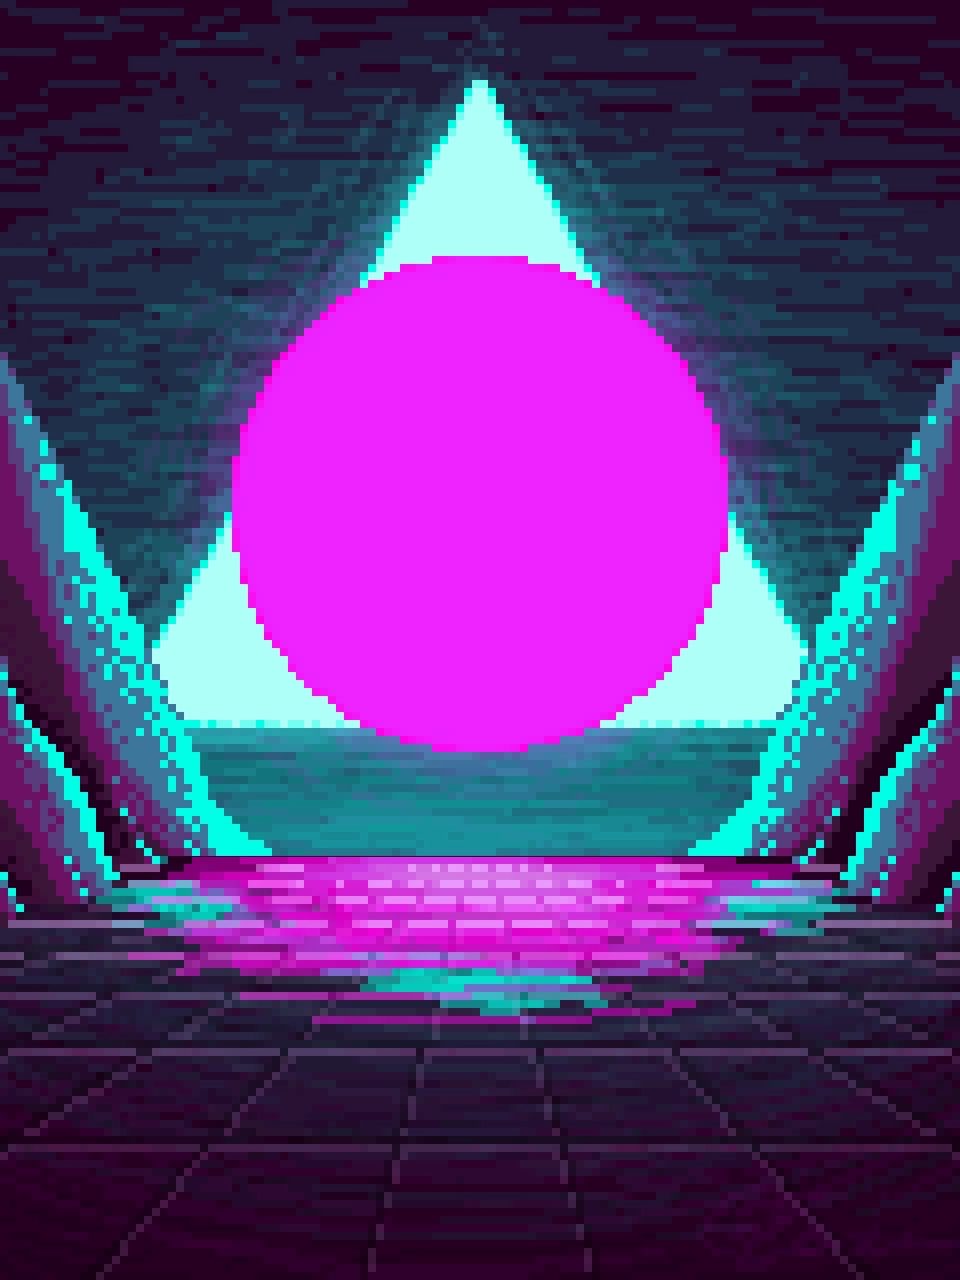 uhhhhh i can explain (i really love this aesthetic okay) #Retro #80s #neon #pixelart #pixelchallenge #fridayswithsketch #100PercentSketch #sonysketch [EDIT: AAAAAH THANKS FOR THE FEATURE]